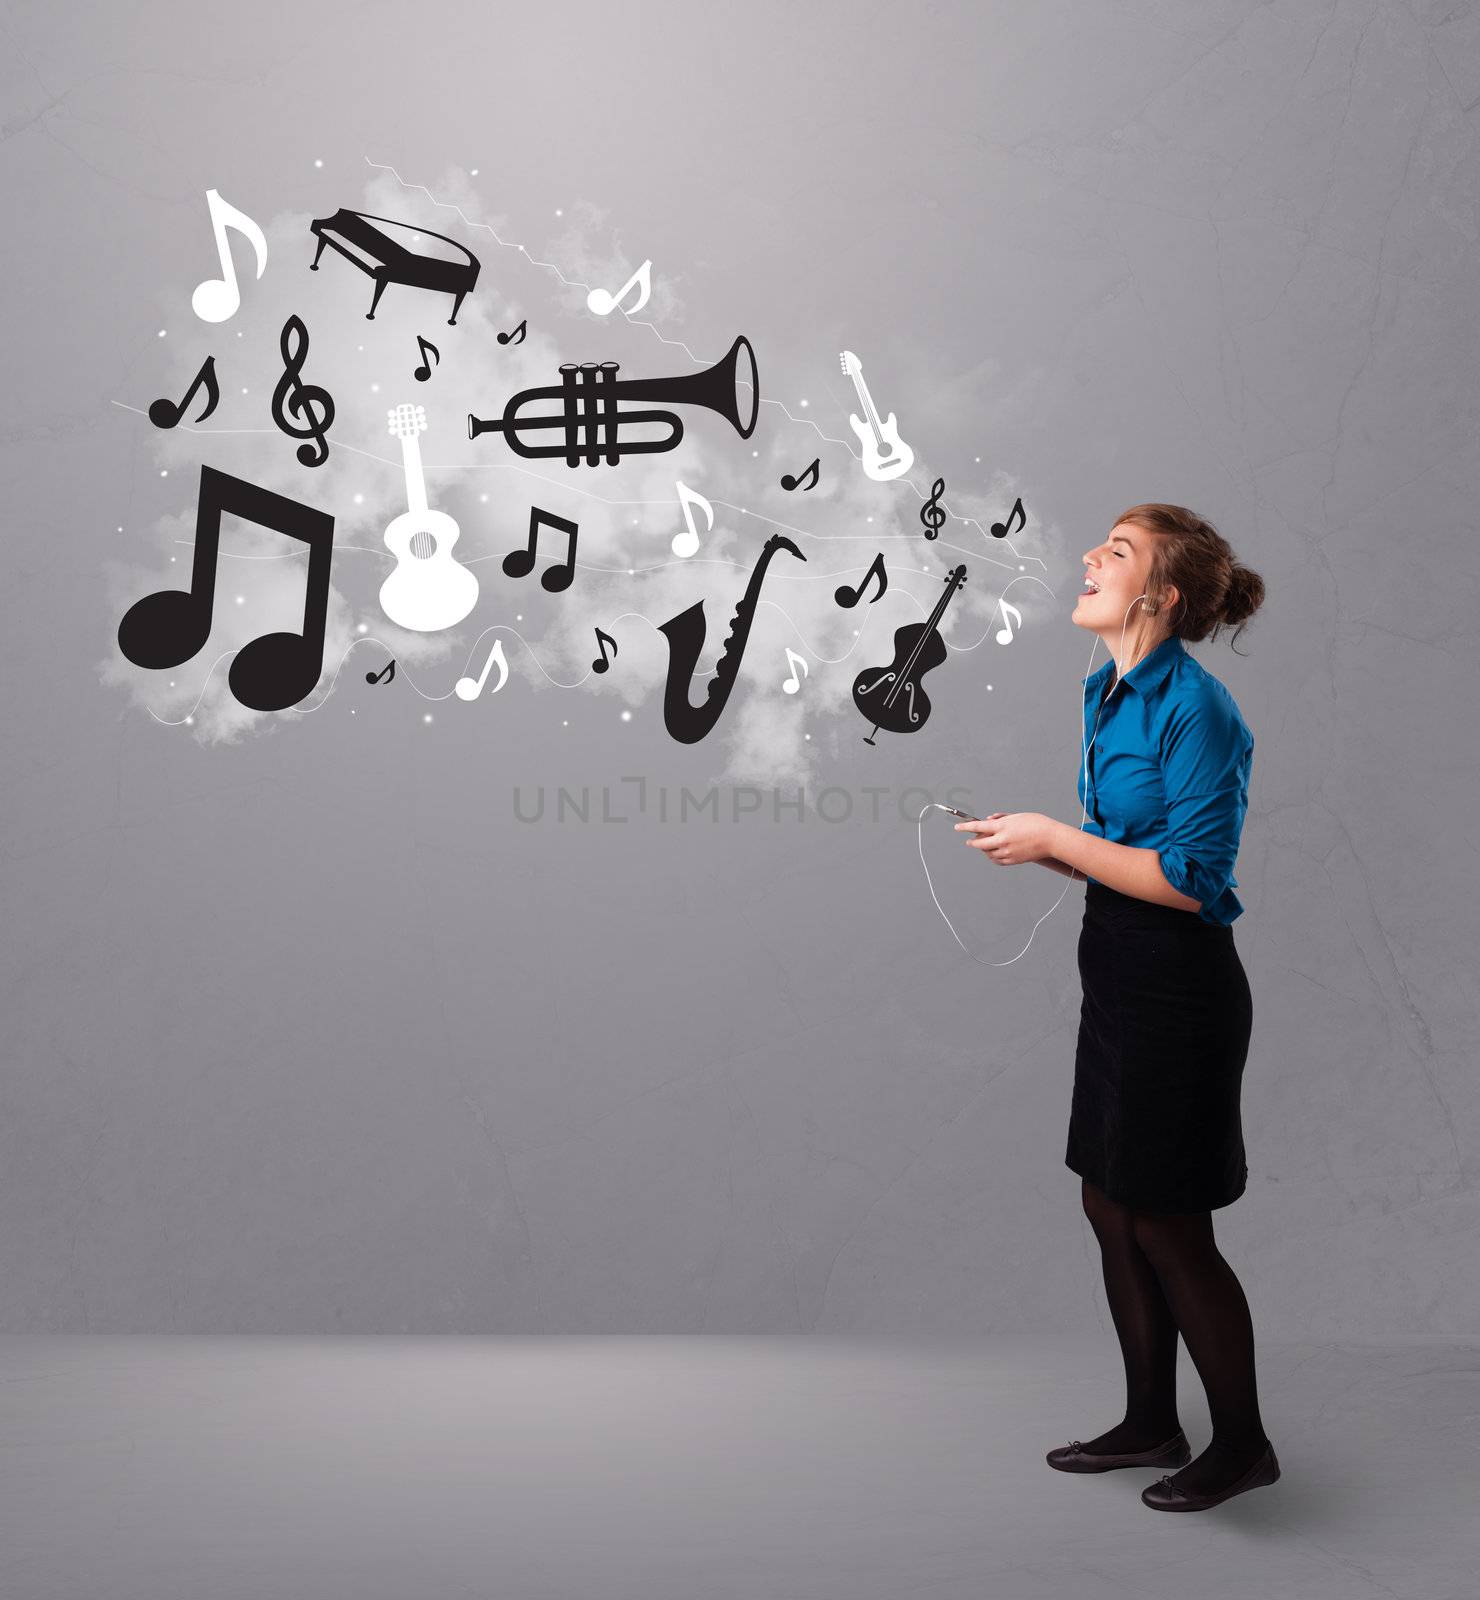 Beautiful young woman singing and listening to music with musical notes and instruments getting out of her mouth